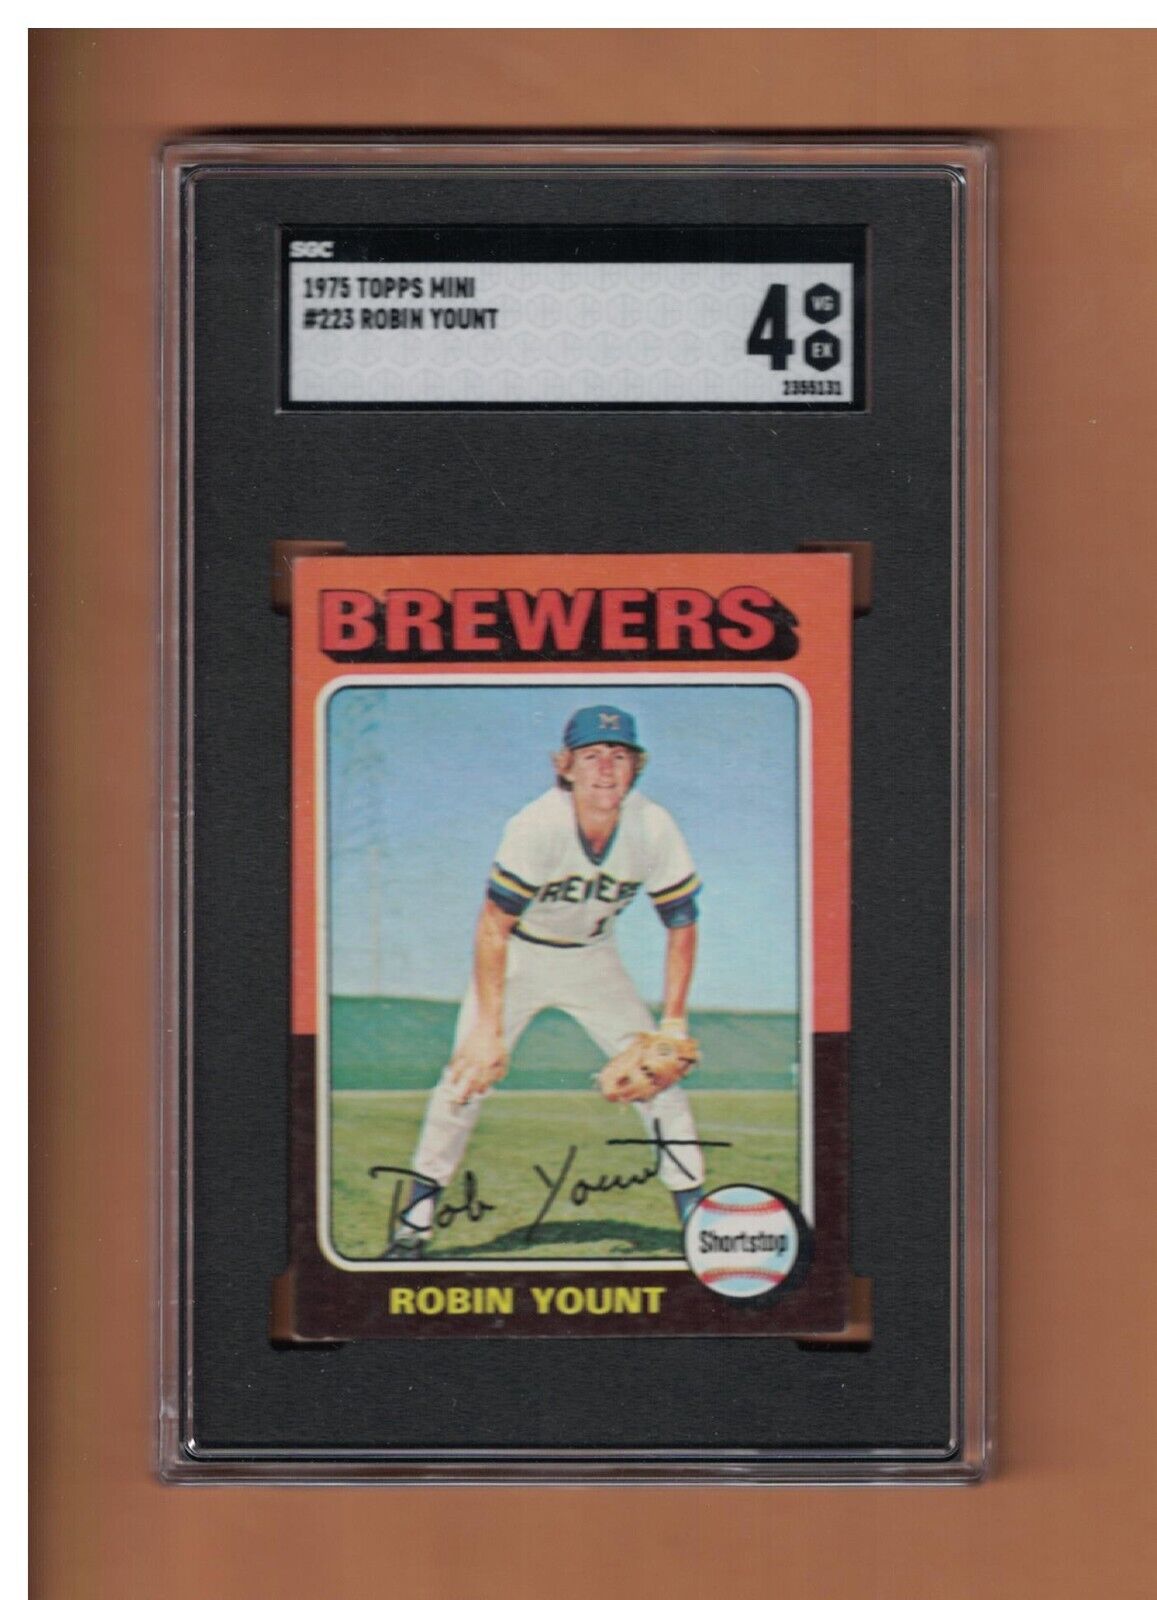 Robin Yount 1975 Topps ROOKIE BASEBALL CARD #223 SGC 4 Milwaukee Brewers. rookie card picture